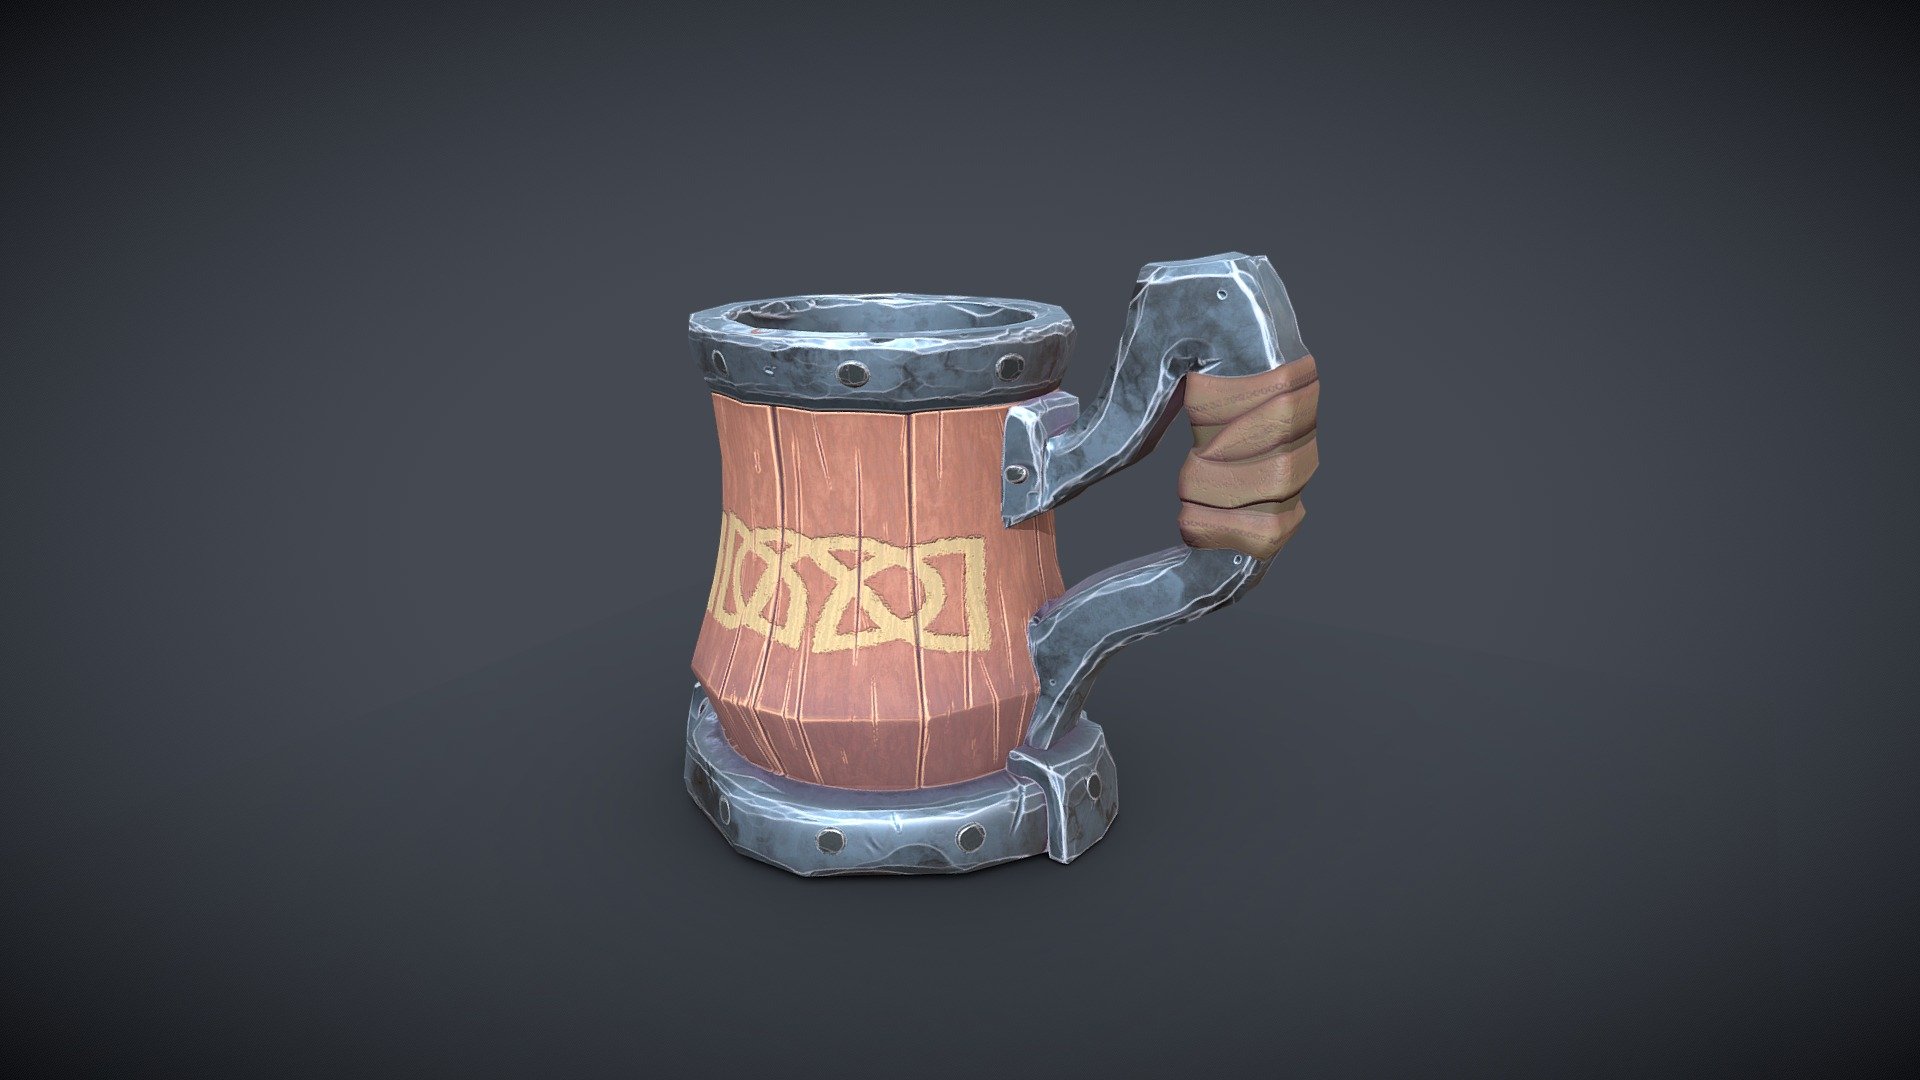 Hi I’m working on stylized assets. Hope you like it guys! This is a Medieval mug 3d model